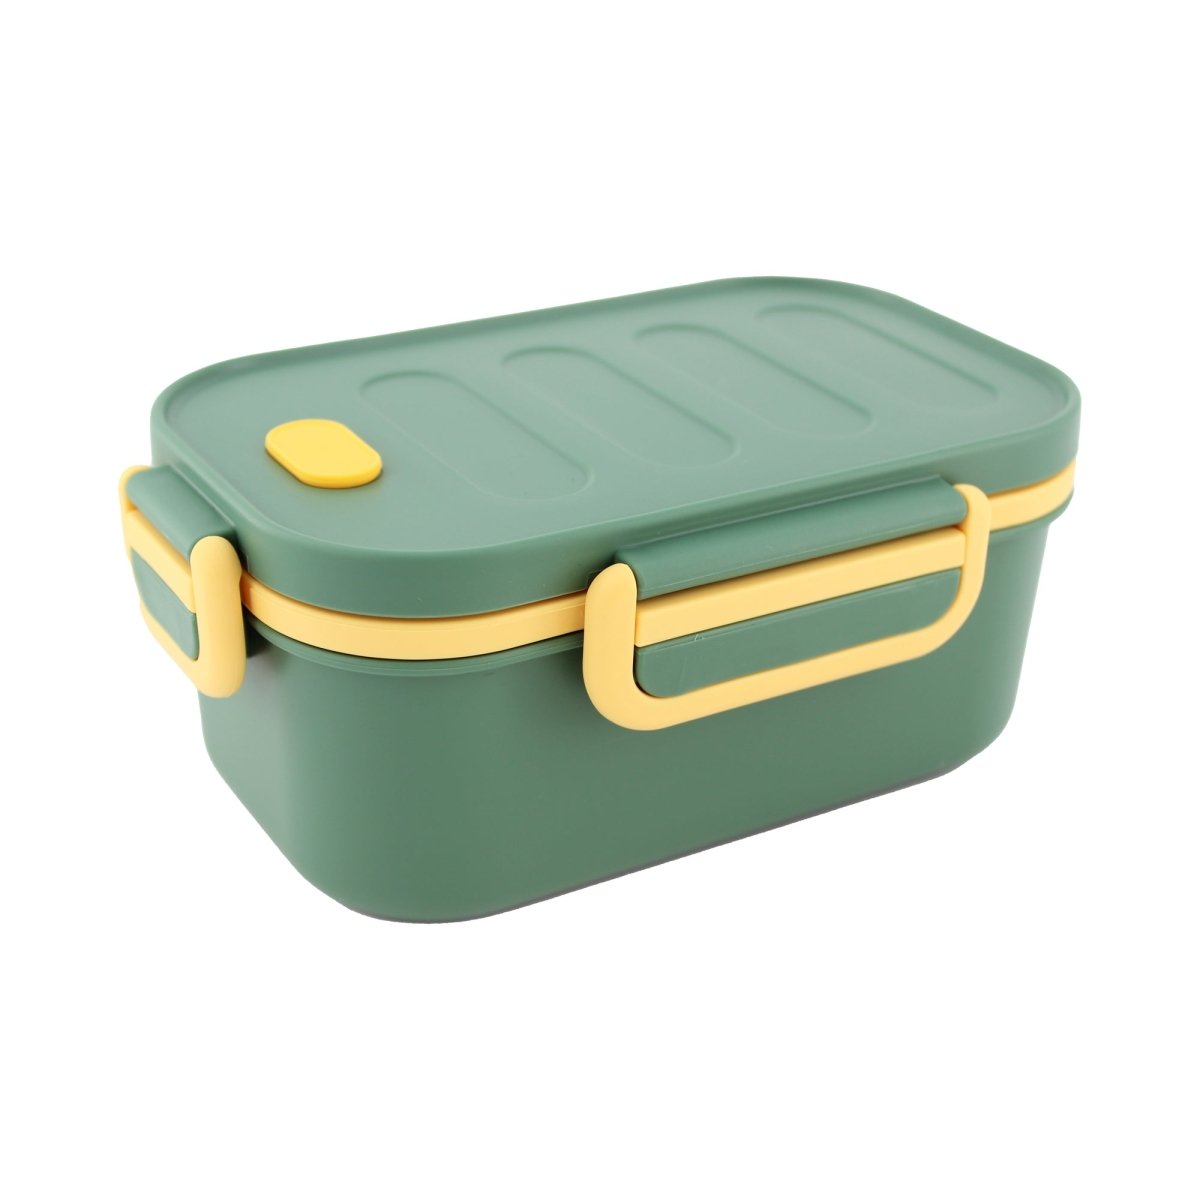 2 Layers Bento Box Lunch Container for Kids Men Women, Leakproof and Durable Lunch Box